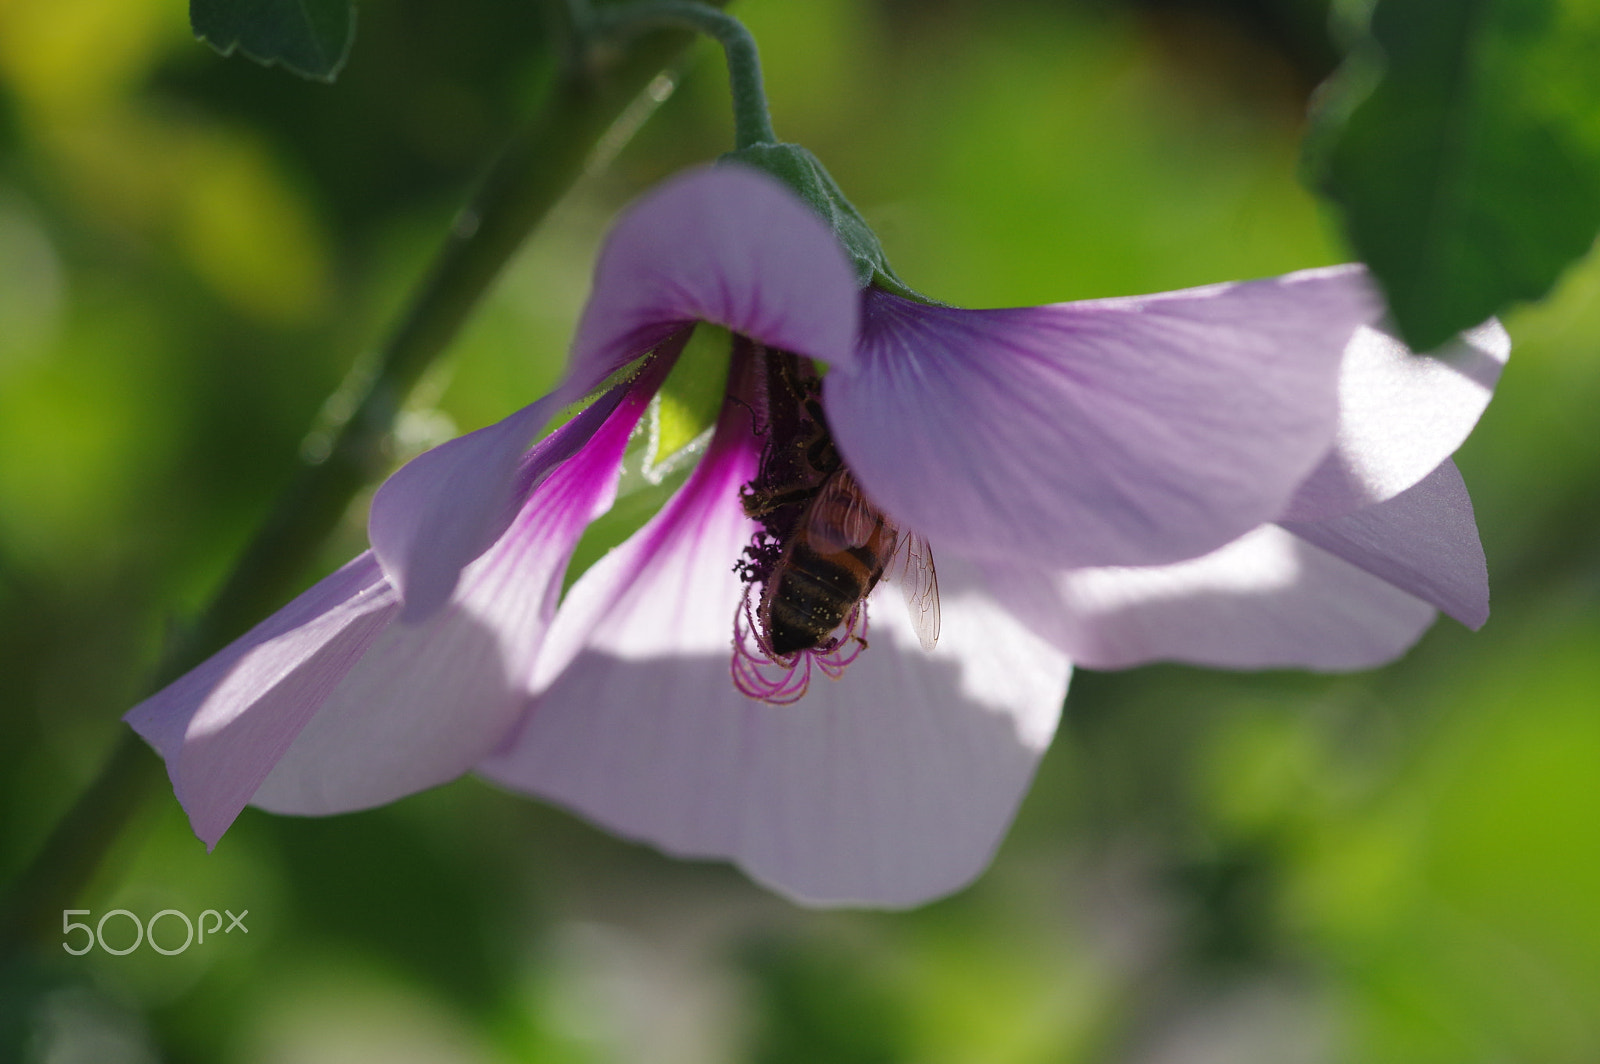 Pentax K-3 II sample photo. Pink flower and bee photography